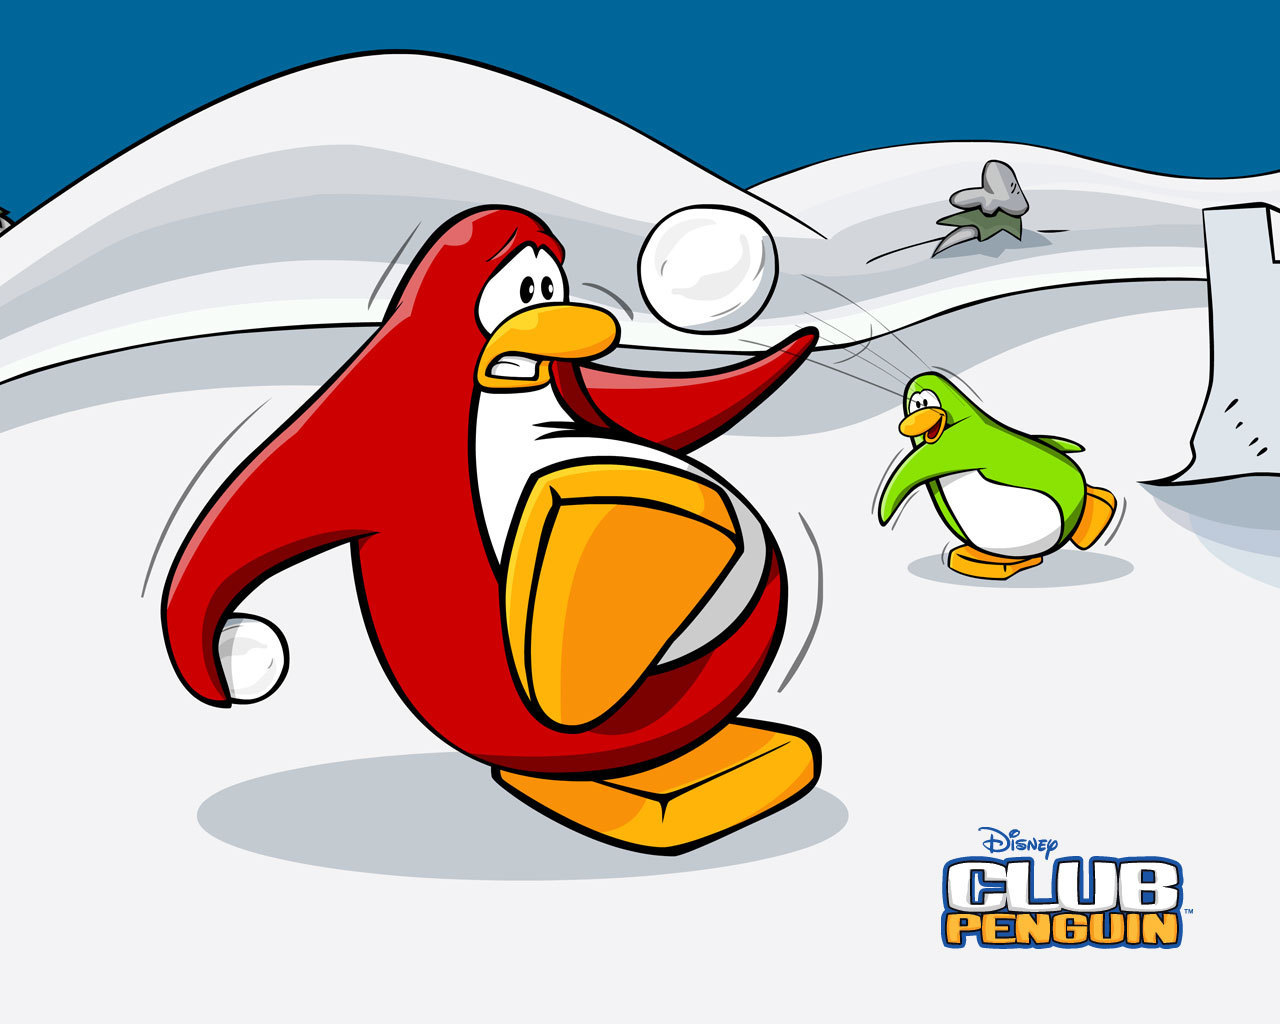 Club Penguin Image A Funny Snowball Fight HD Wallpaper And